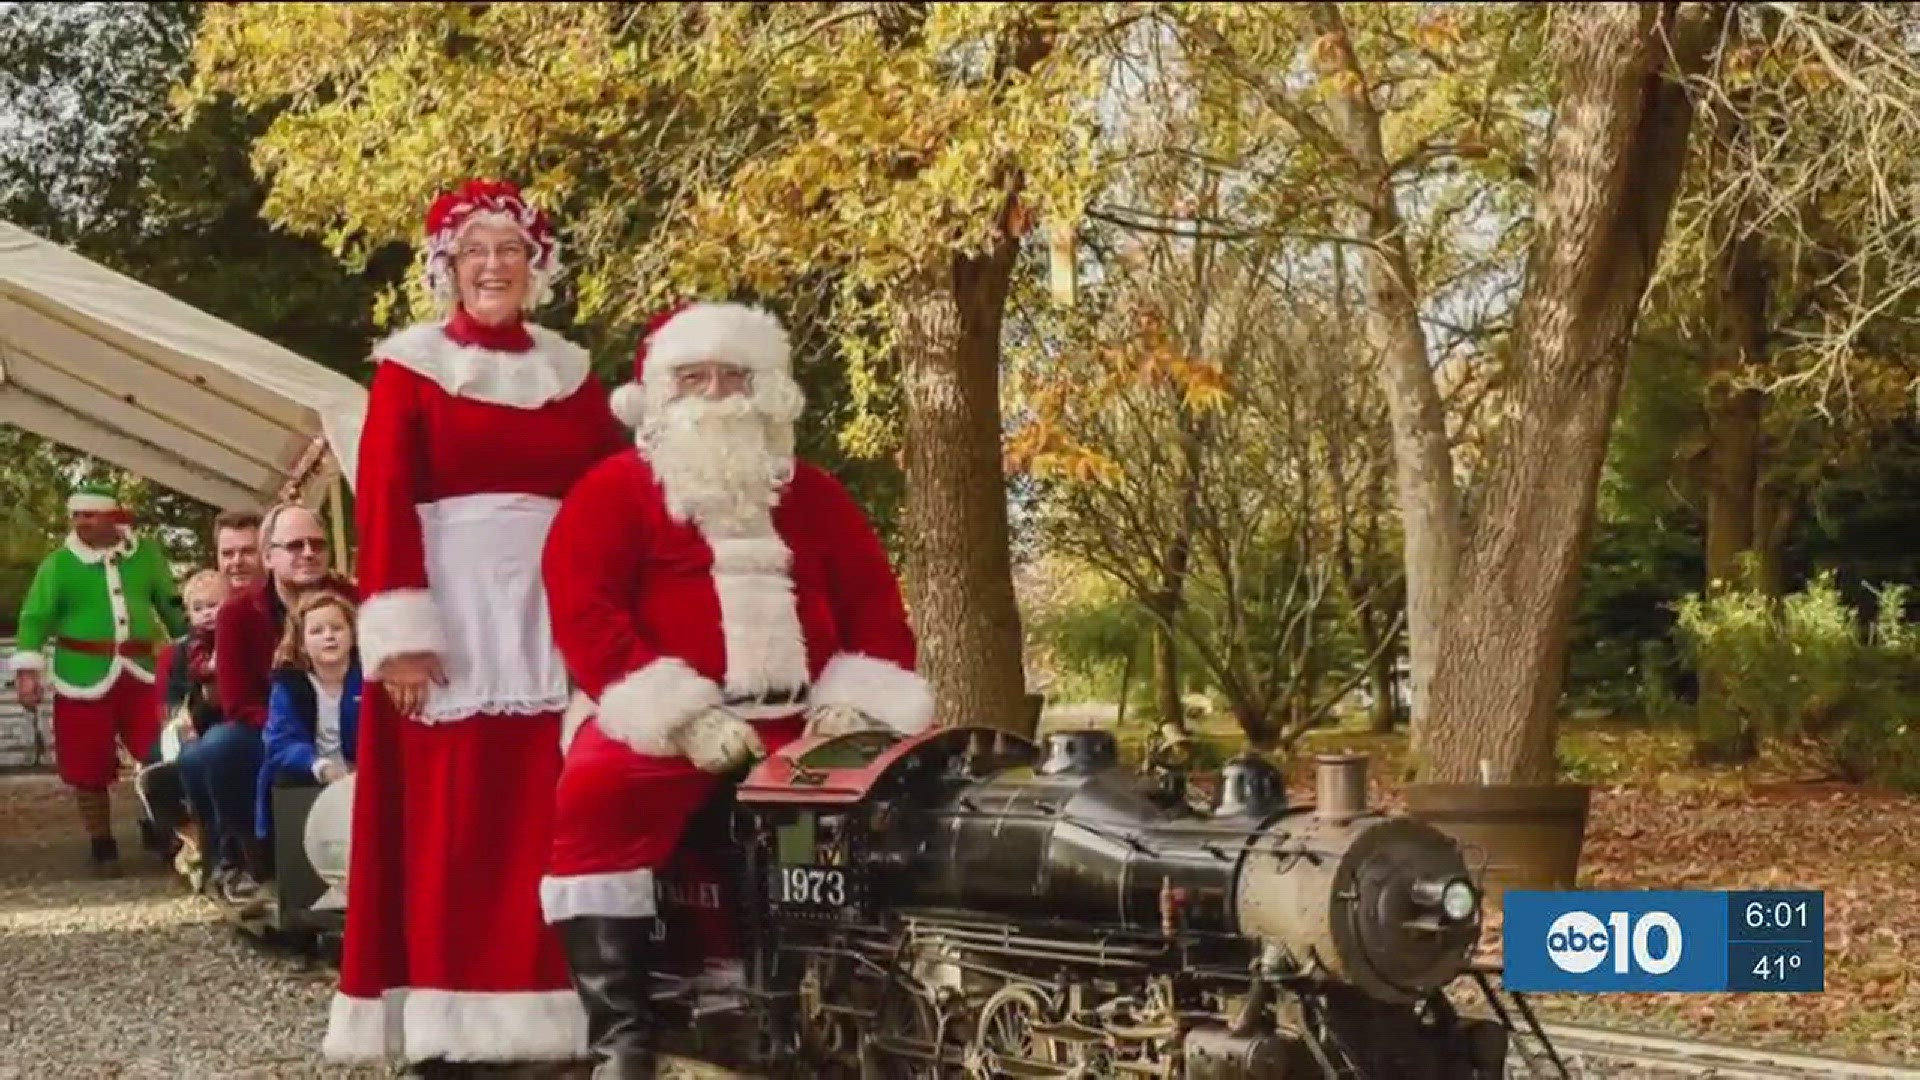 Someone stole a train that a family uses to give kids free rides all year, and for Christmas. (Dec. 25, 2016)